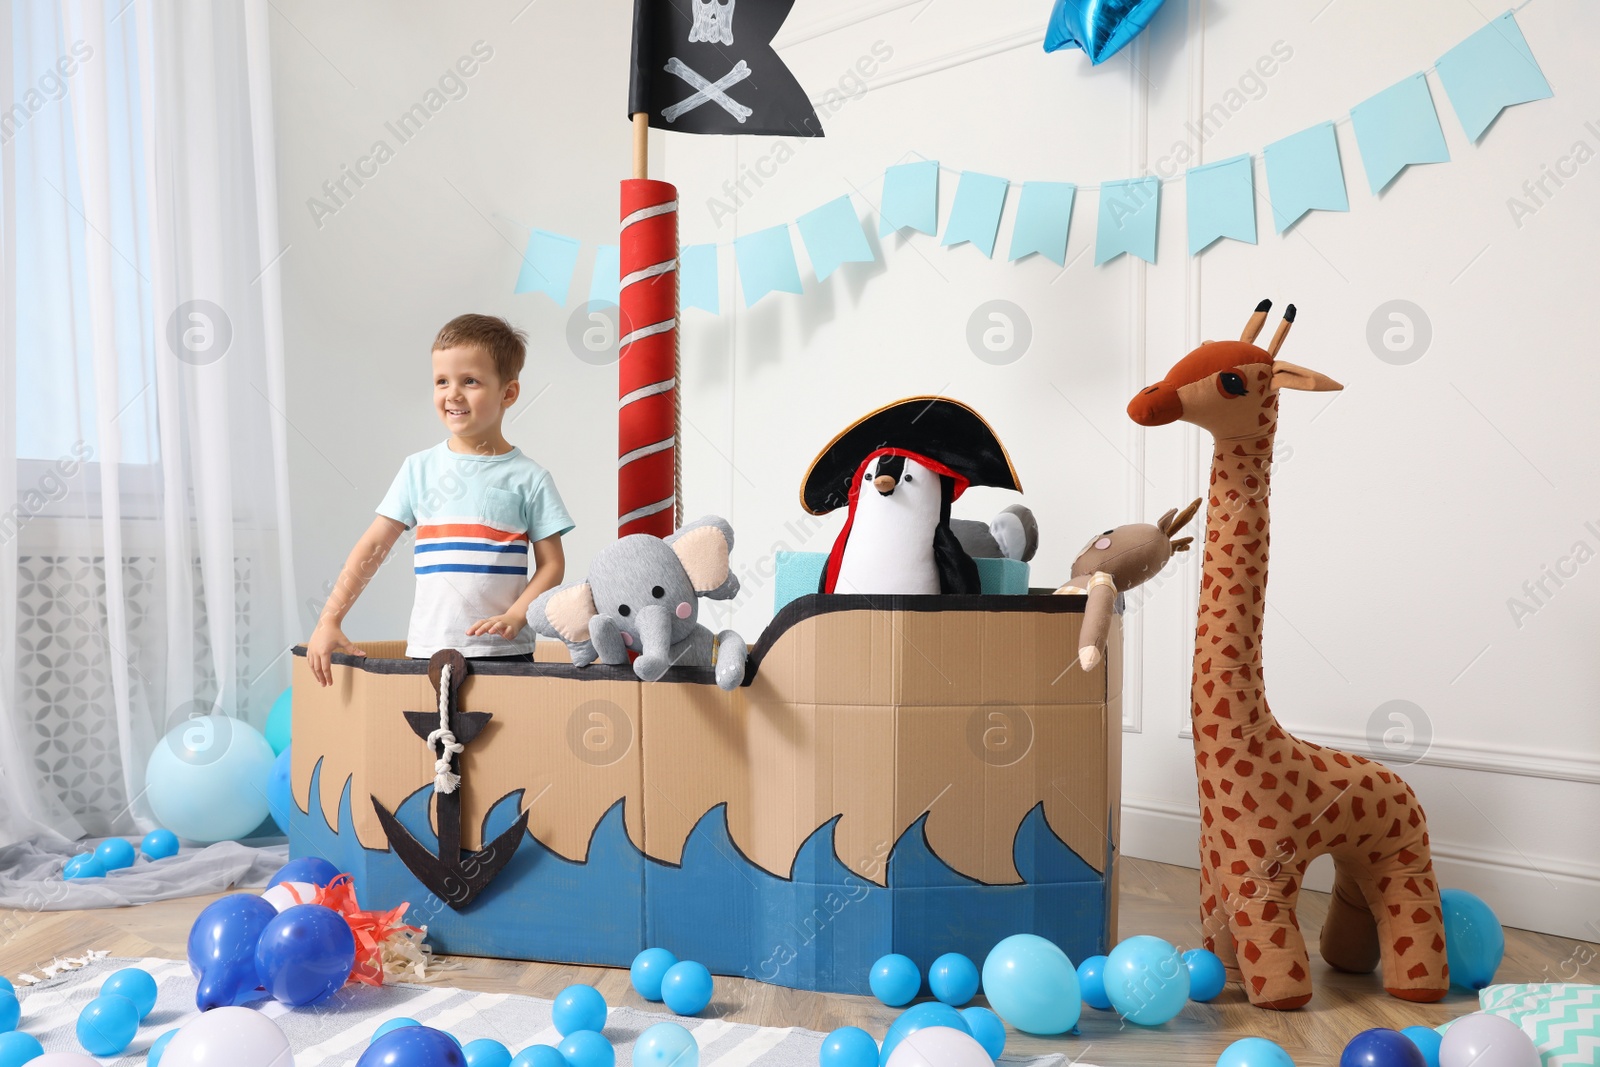 Photo of Cute little boy playing with pirate cardboard ship and toys at home. Child's room interior